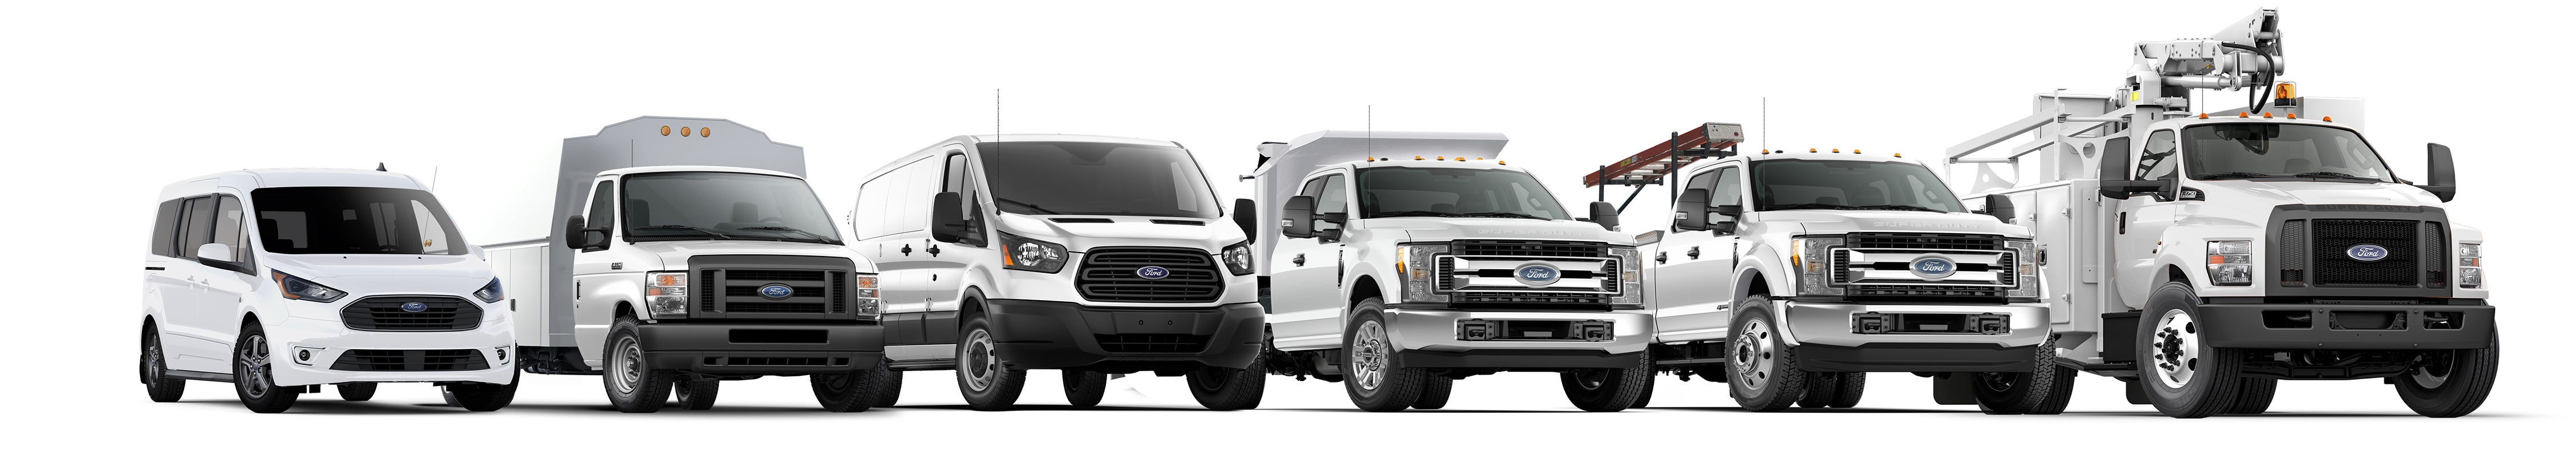 Full Lineup of COmmercial vehicles